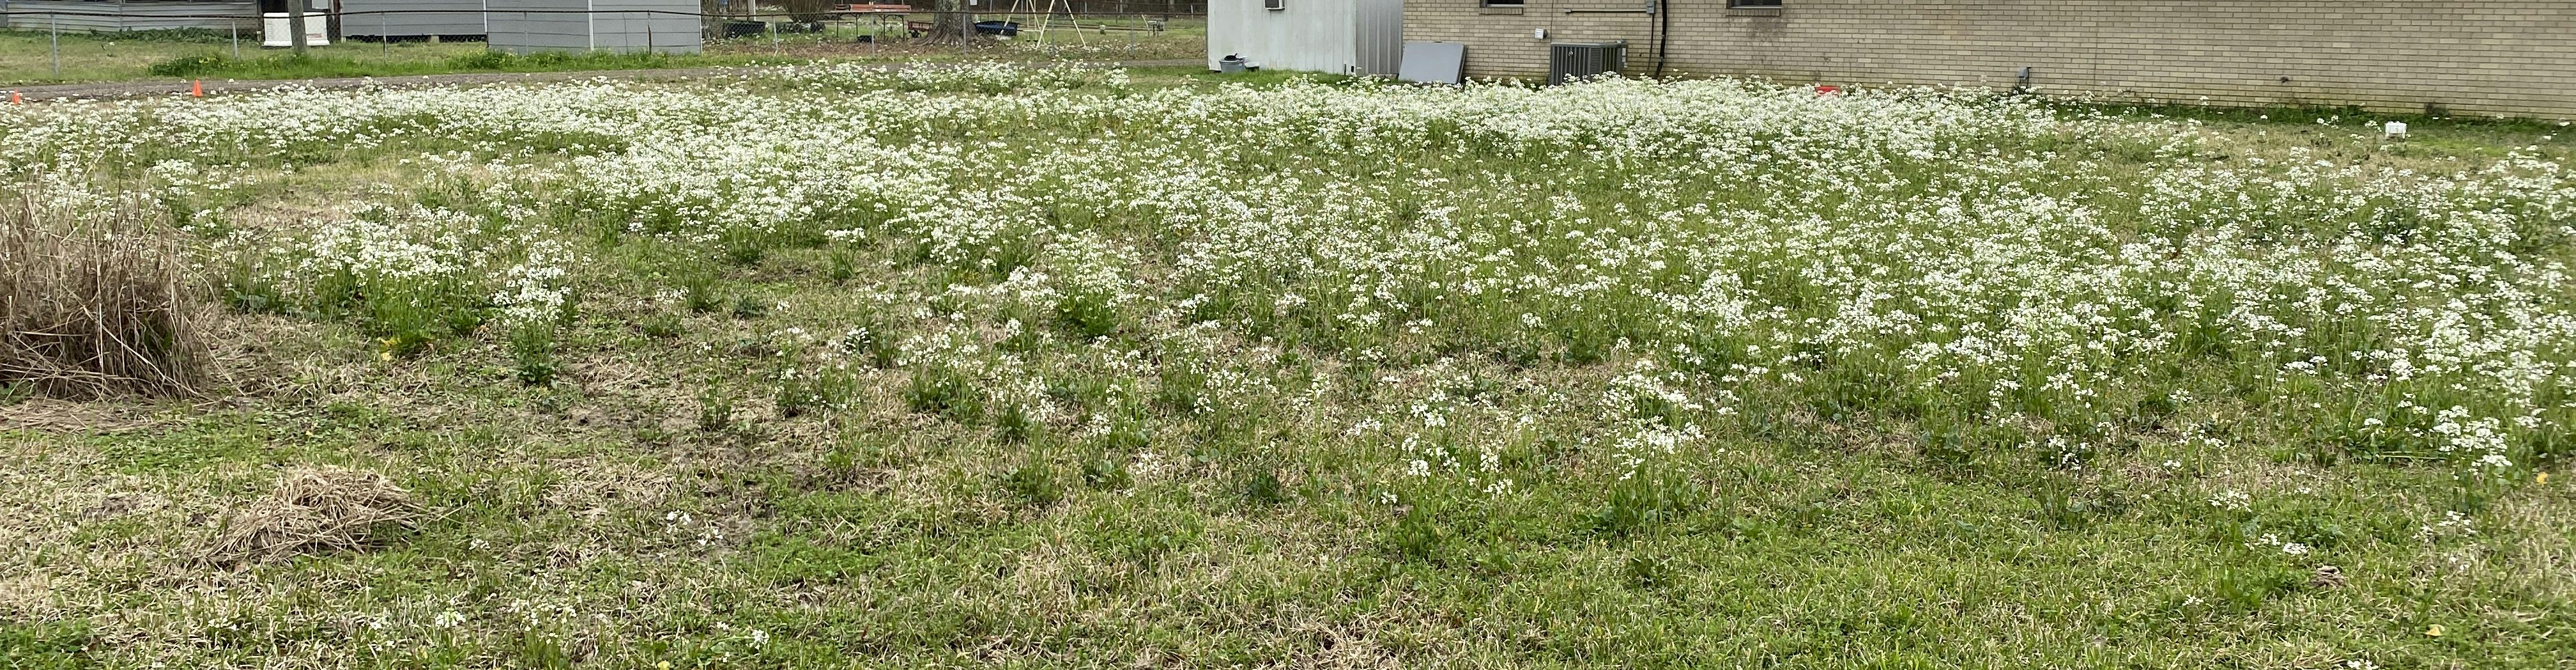 Hundreds of small plants in bloom, filling a yard with thousands of  small white flowers